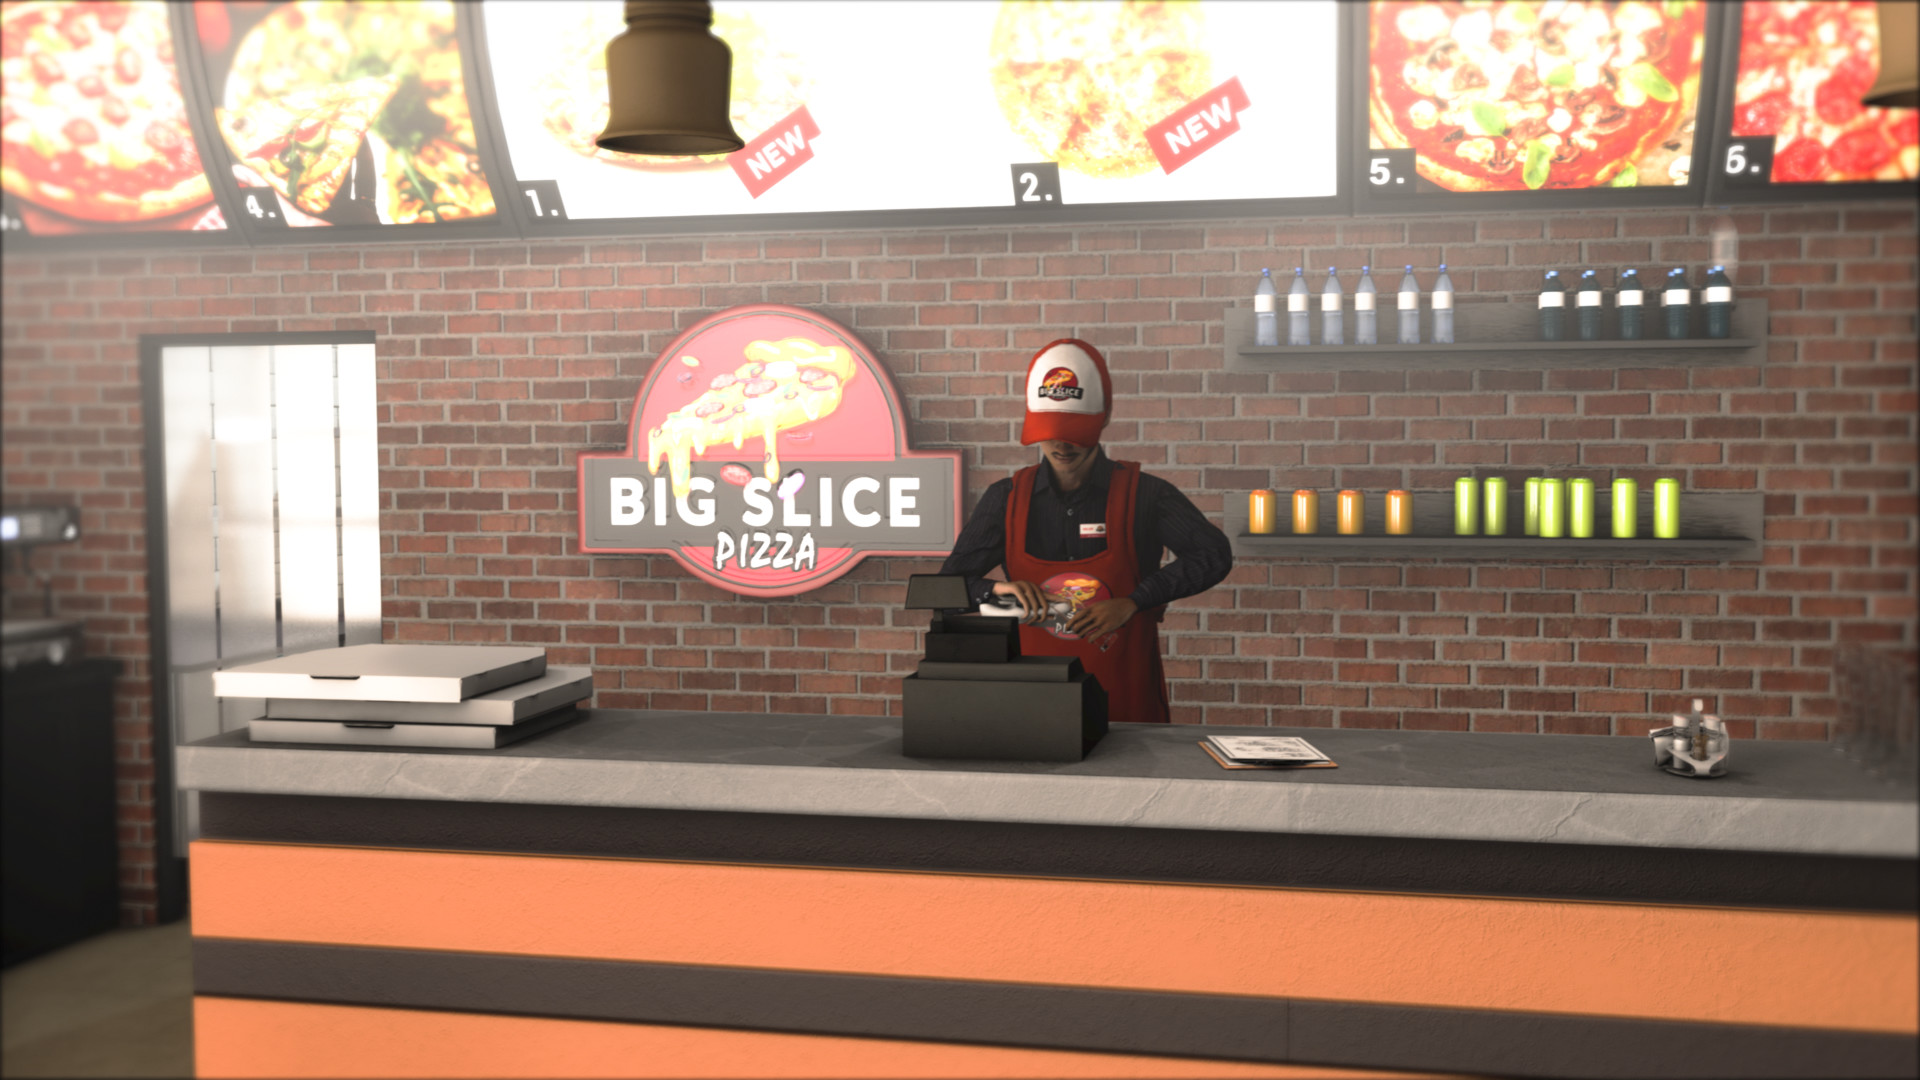 New & popular free Simulation games tagged pizza 